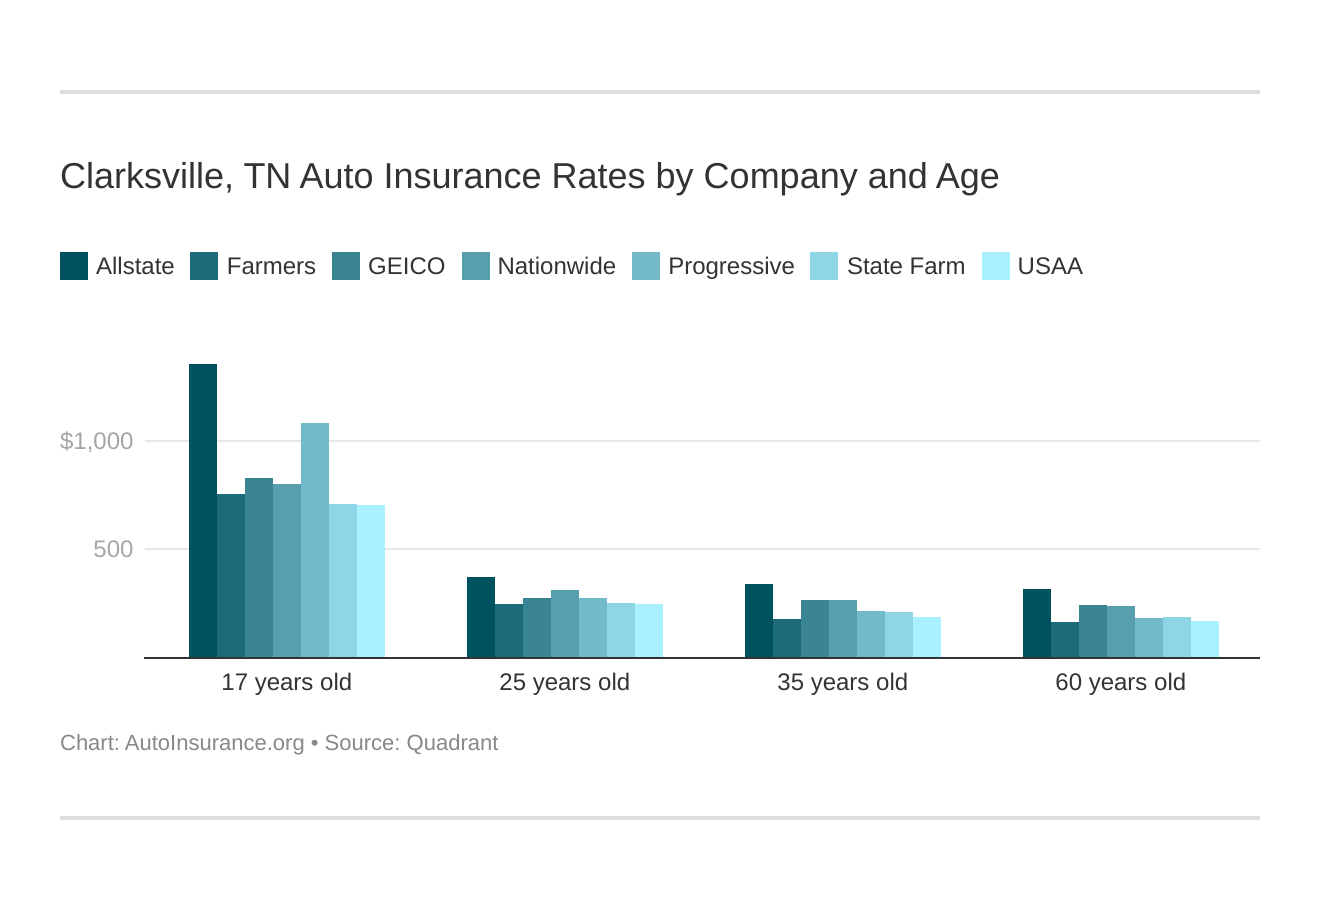 Clarksville, TN Auto Insurance Rates by Company and Age